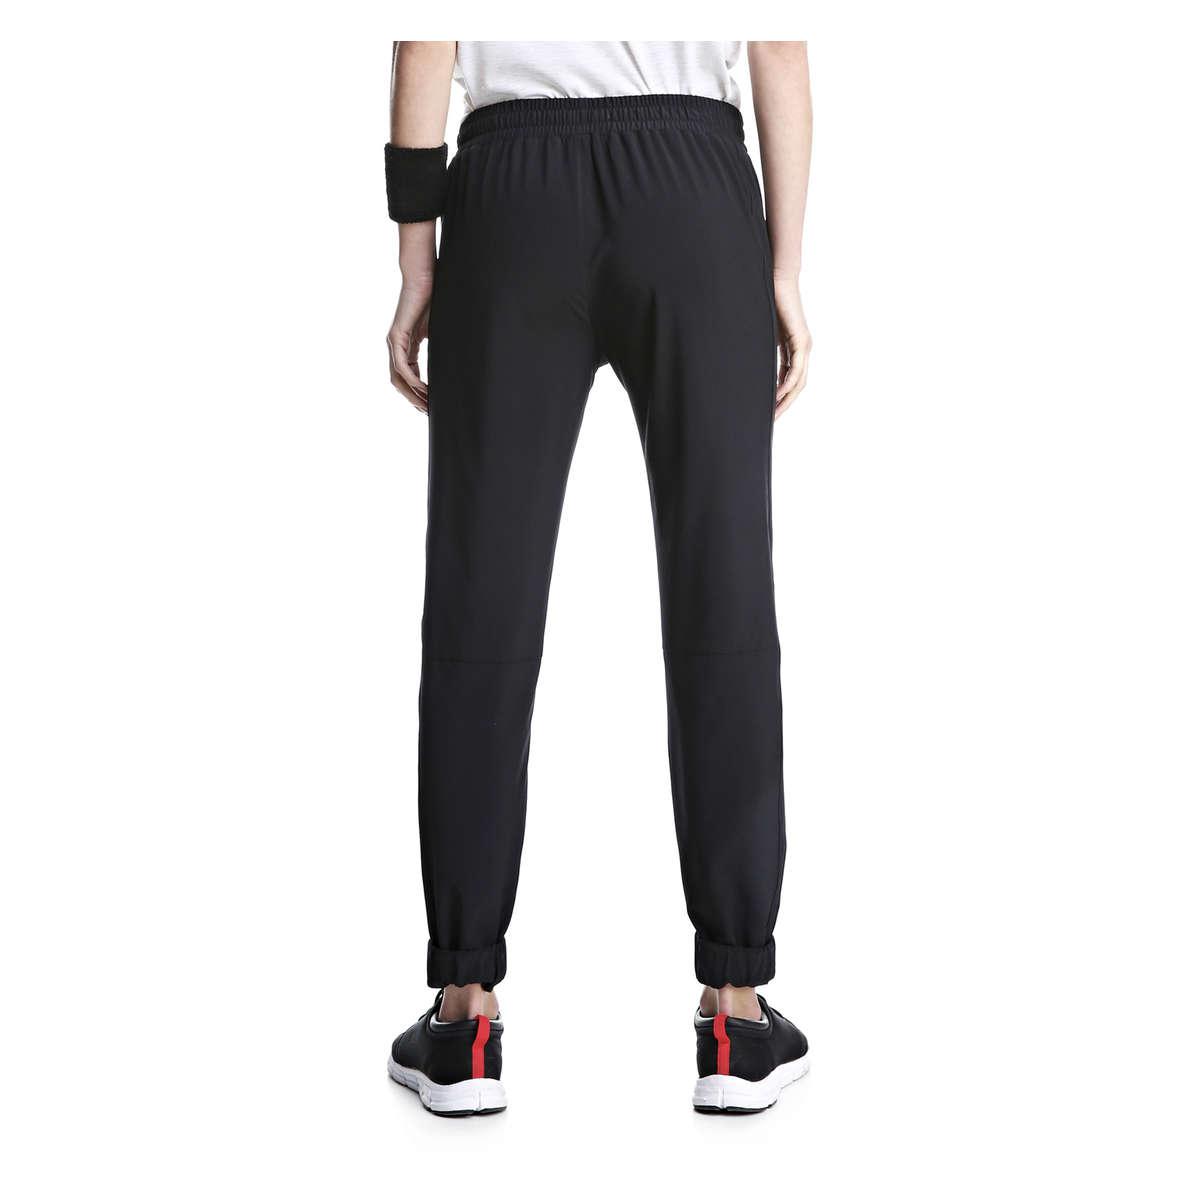 Lyst - Joe Fresh Lined Active Pant in Black